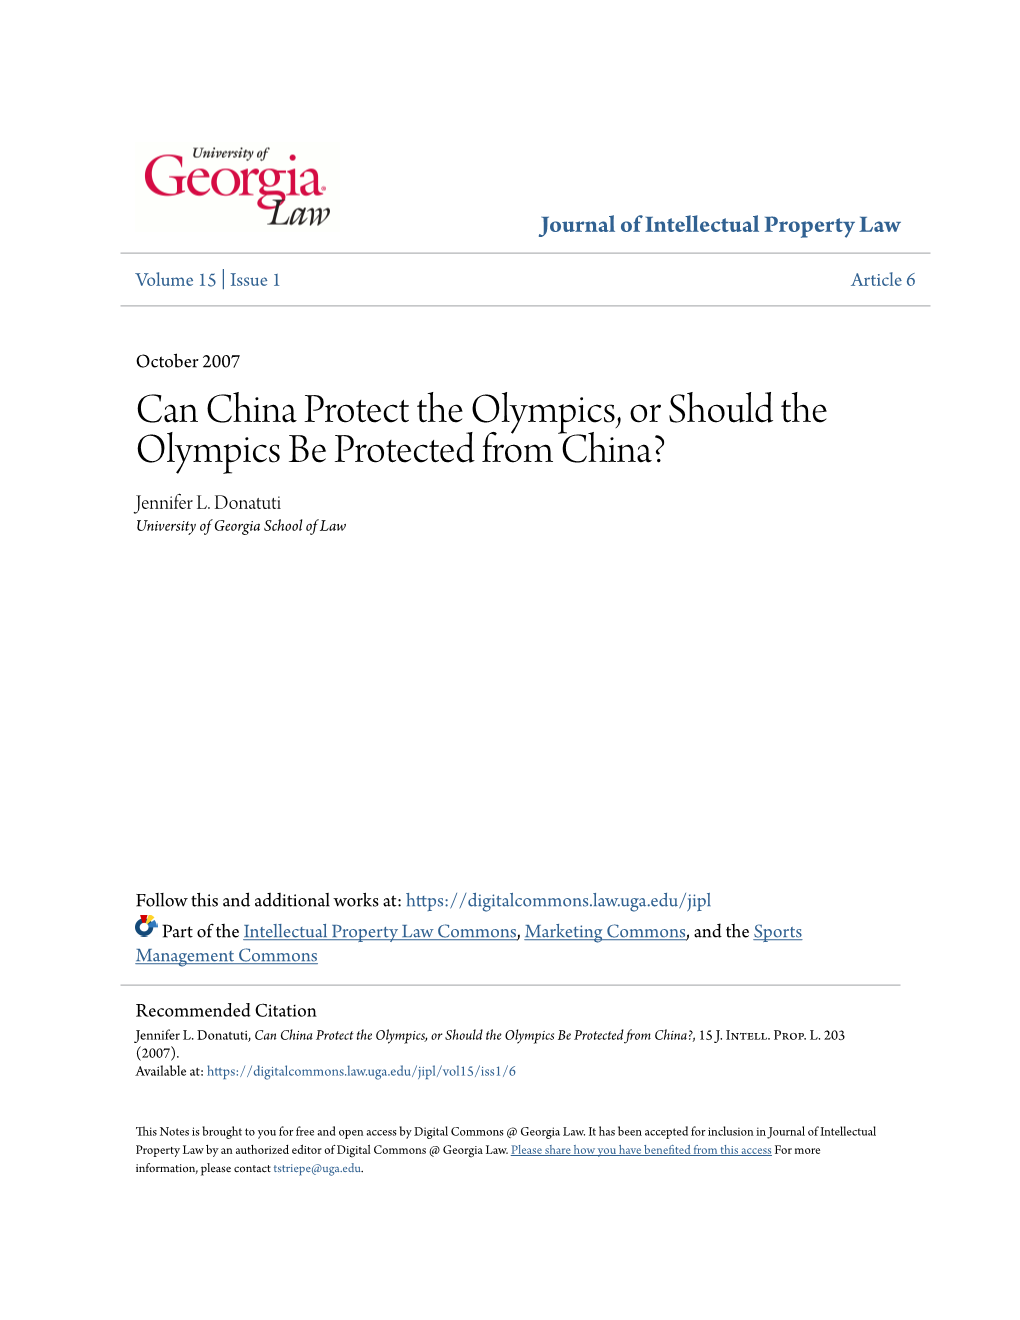 Can China Protect the Olympics, Or Should the Olympics Be Protected from China? Jennifer L